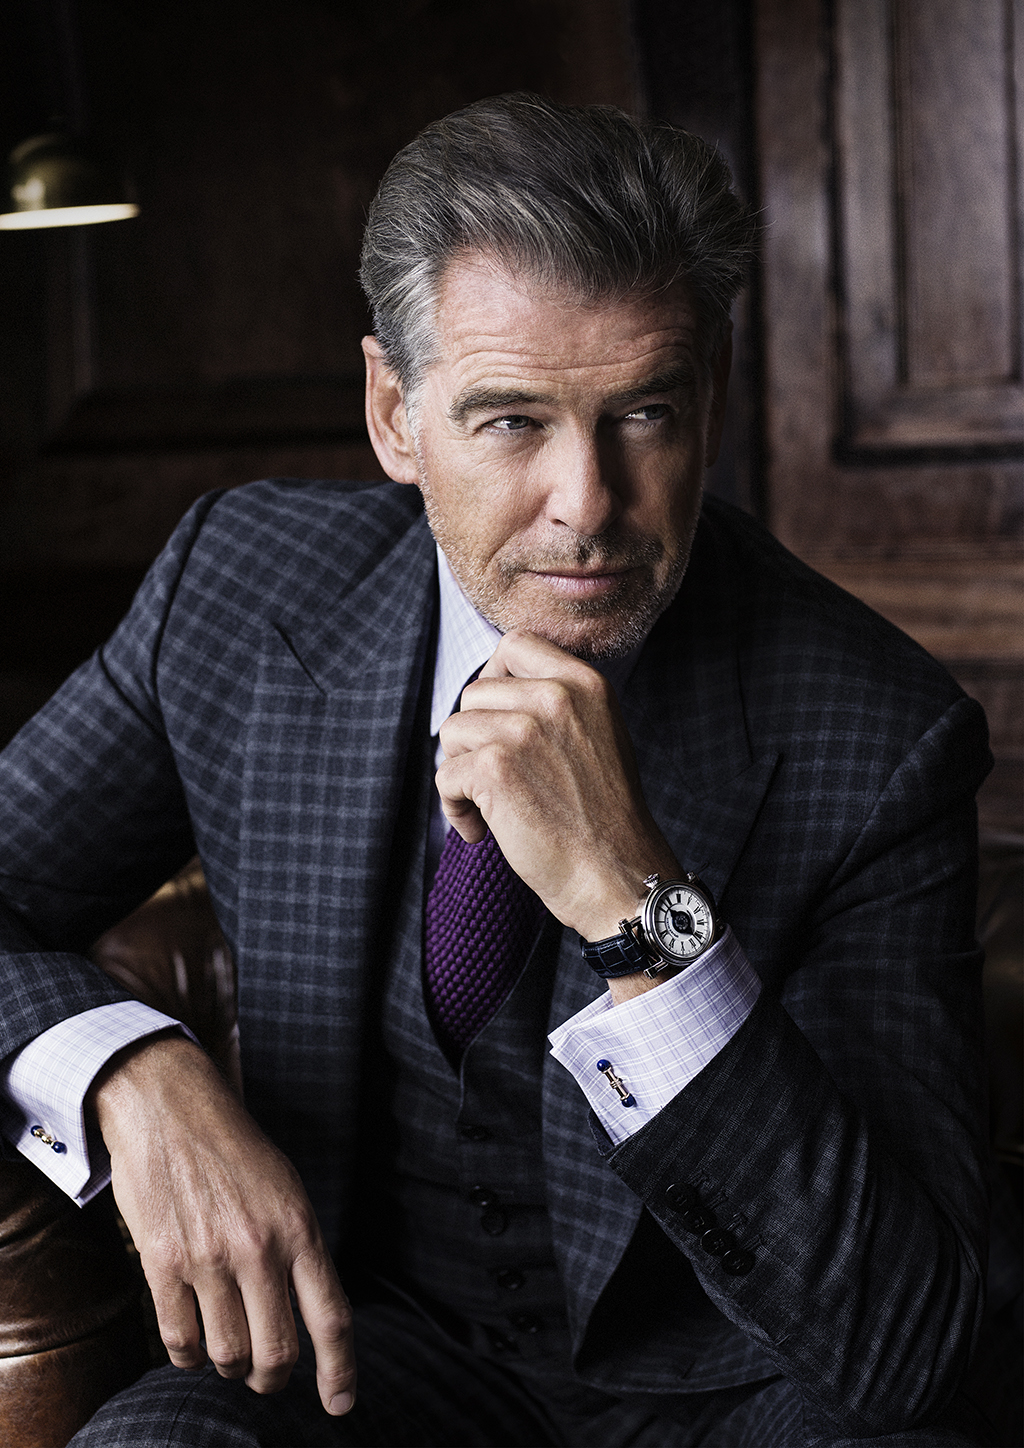 In 2014, Pierce Brosnan understudied Peter Speake-Marin for his role as a watchmaker for the 2015 film, Survivor.